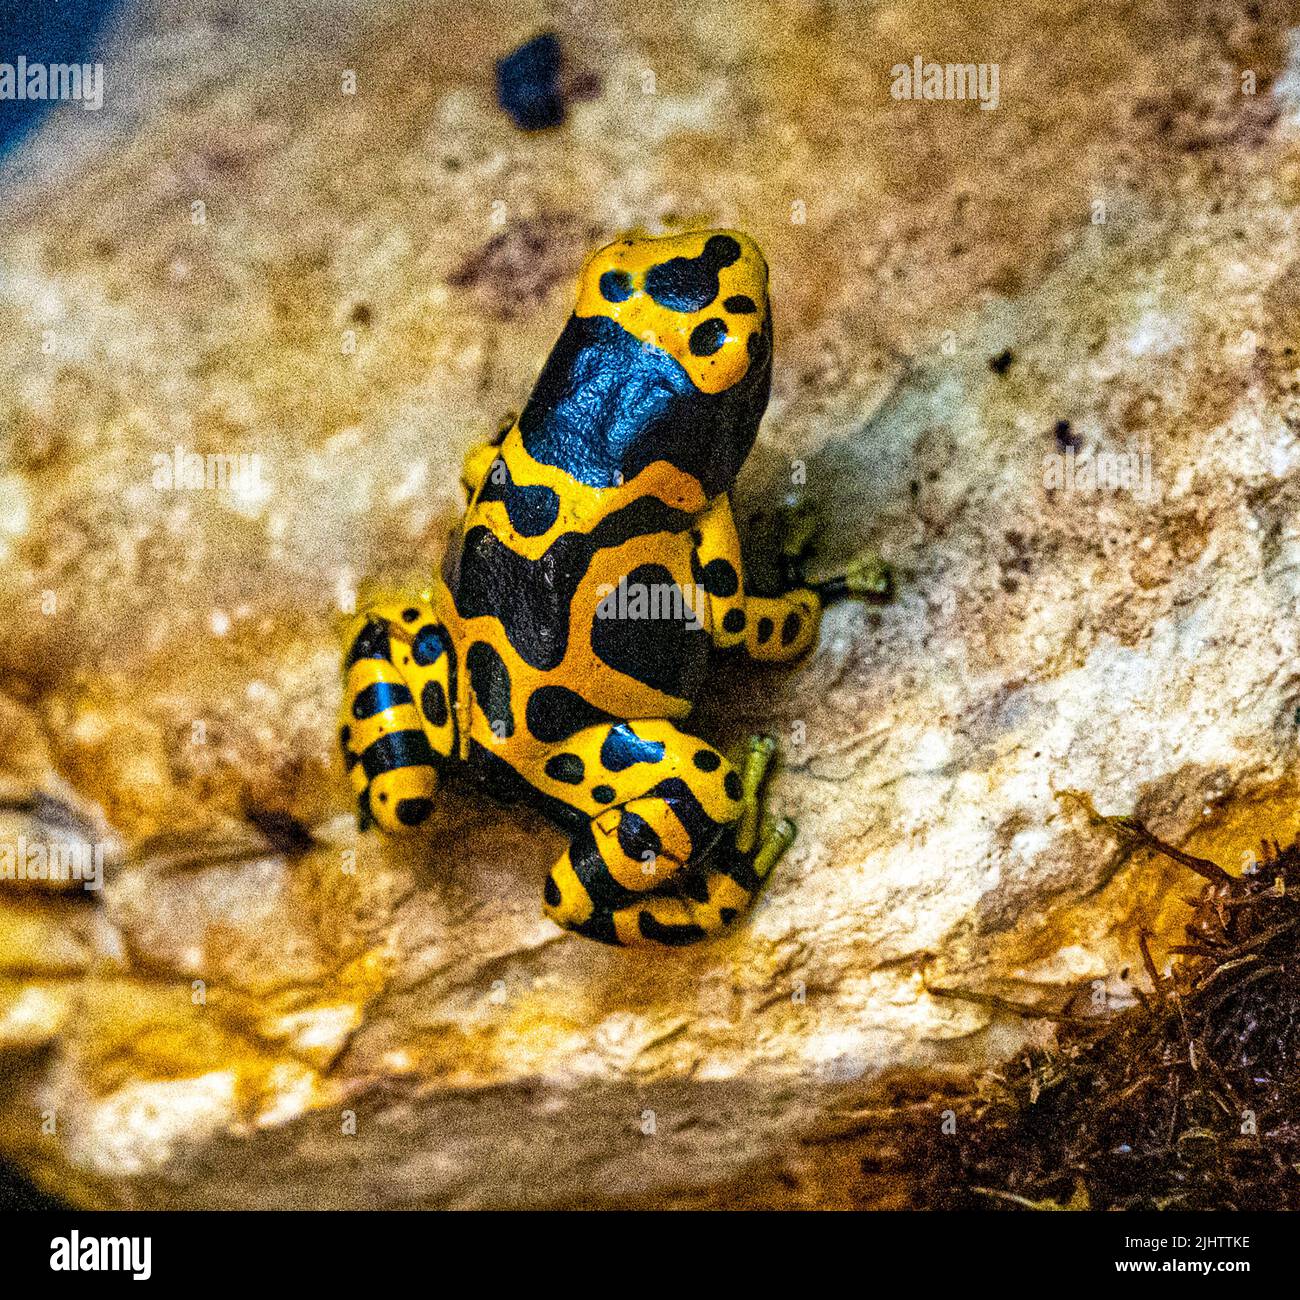 Yellow-banded poison dart frog or yellow-headed poison dart frog (Dendrobates leucomelas). Tropical frog living in South America. Stock Photo